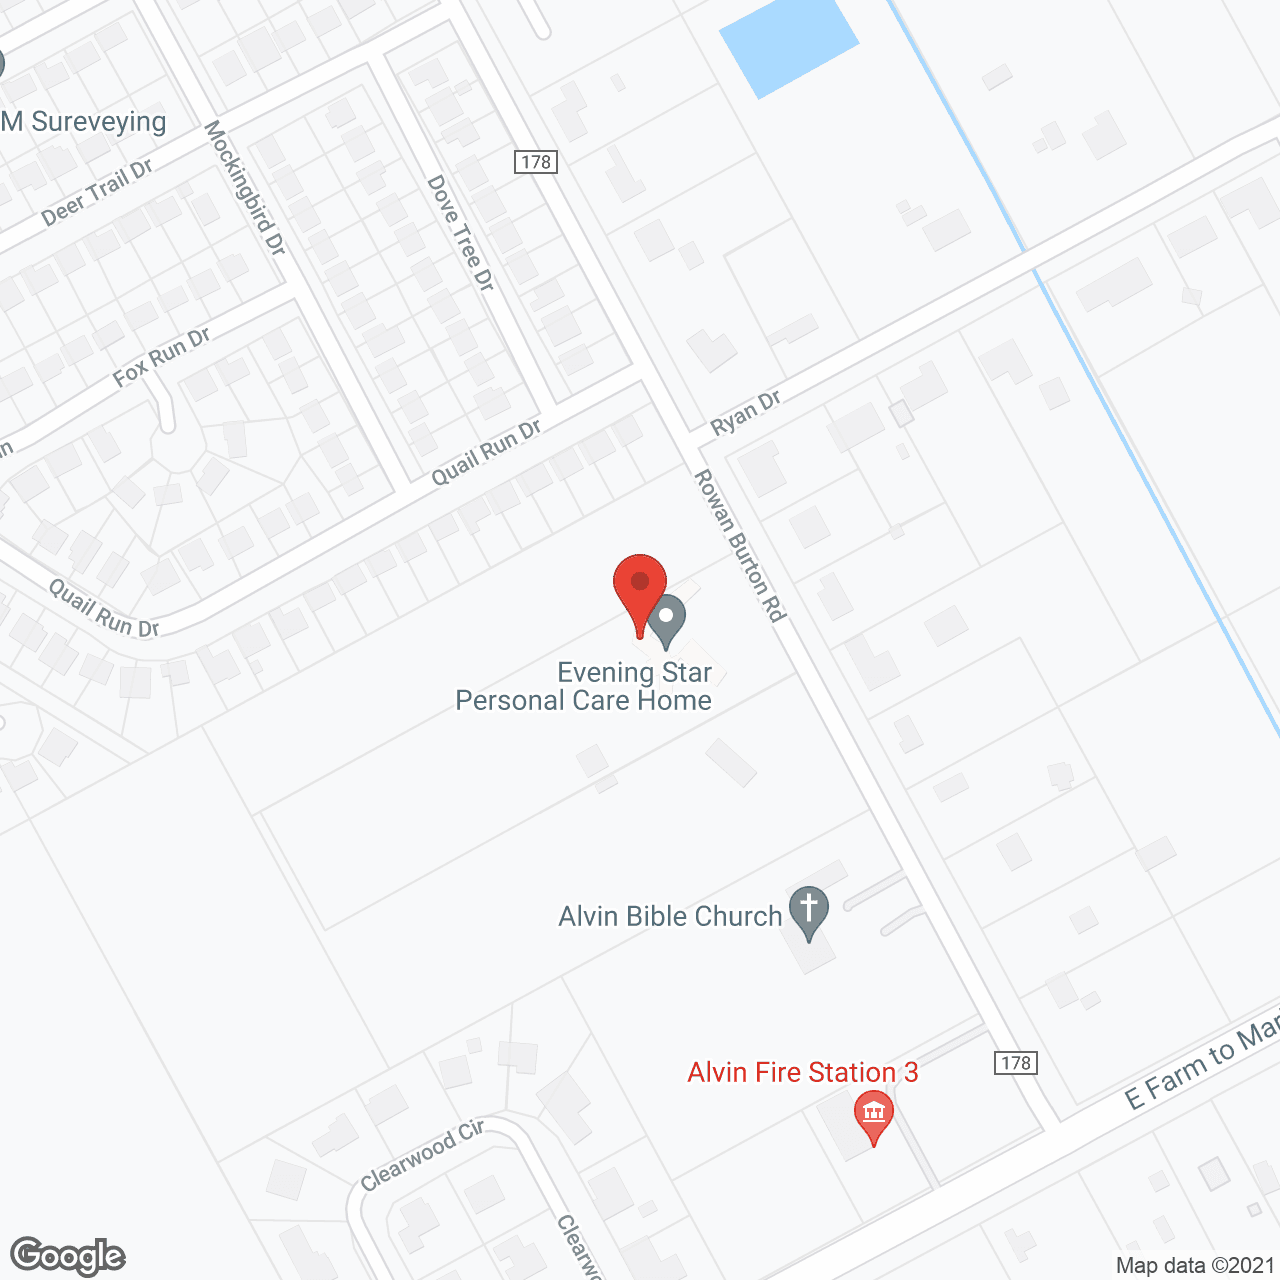 Evening Star Personal Care Home in google map